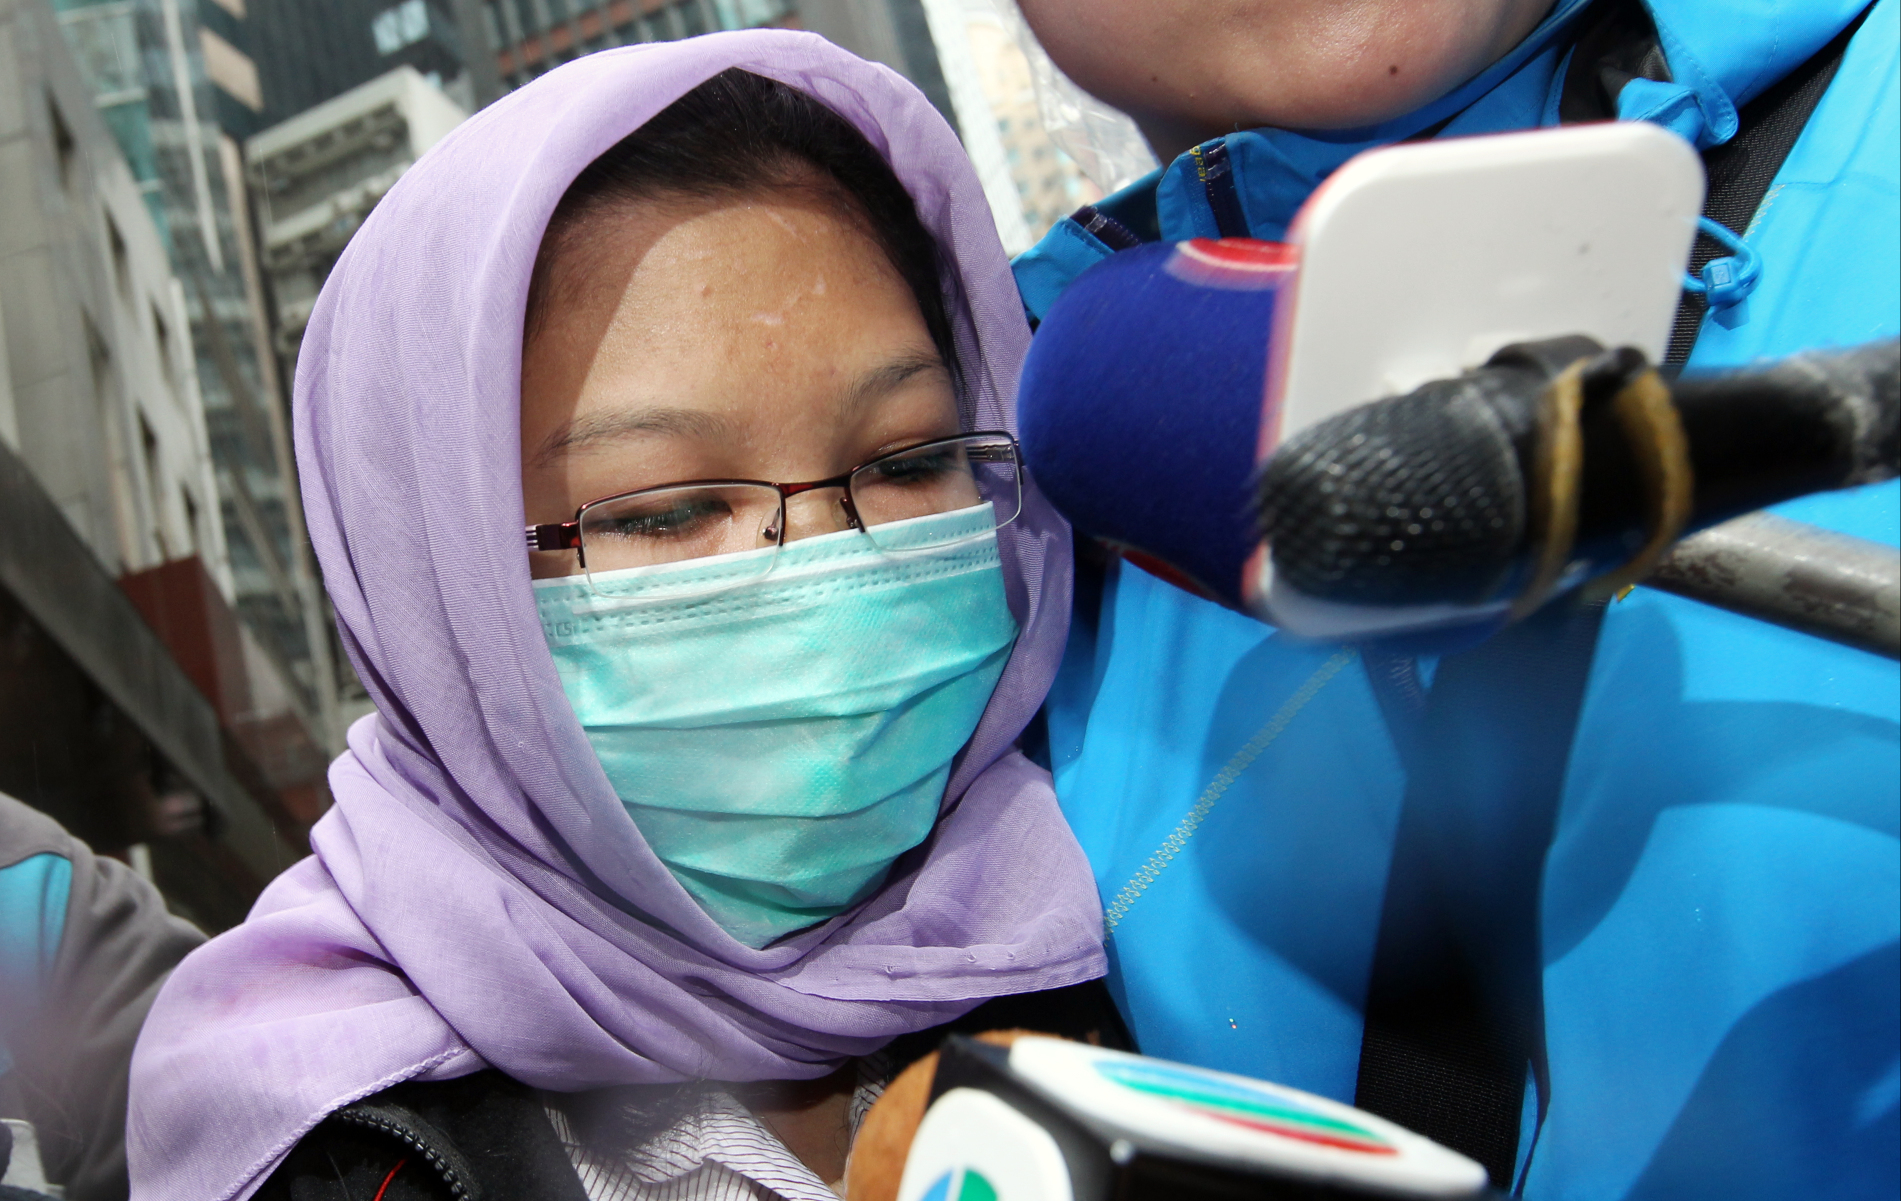 Erwiana, pictured when she was in Hong Kong to assist police, said she hoped governments around the world would give more attention to the conditions of migrant workers. Photo: Felix Wong